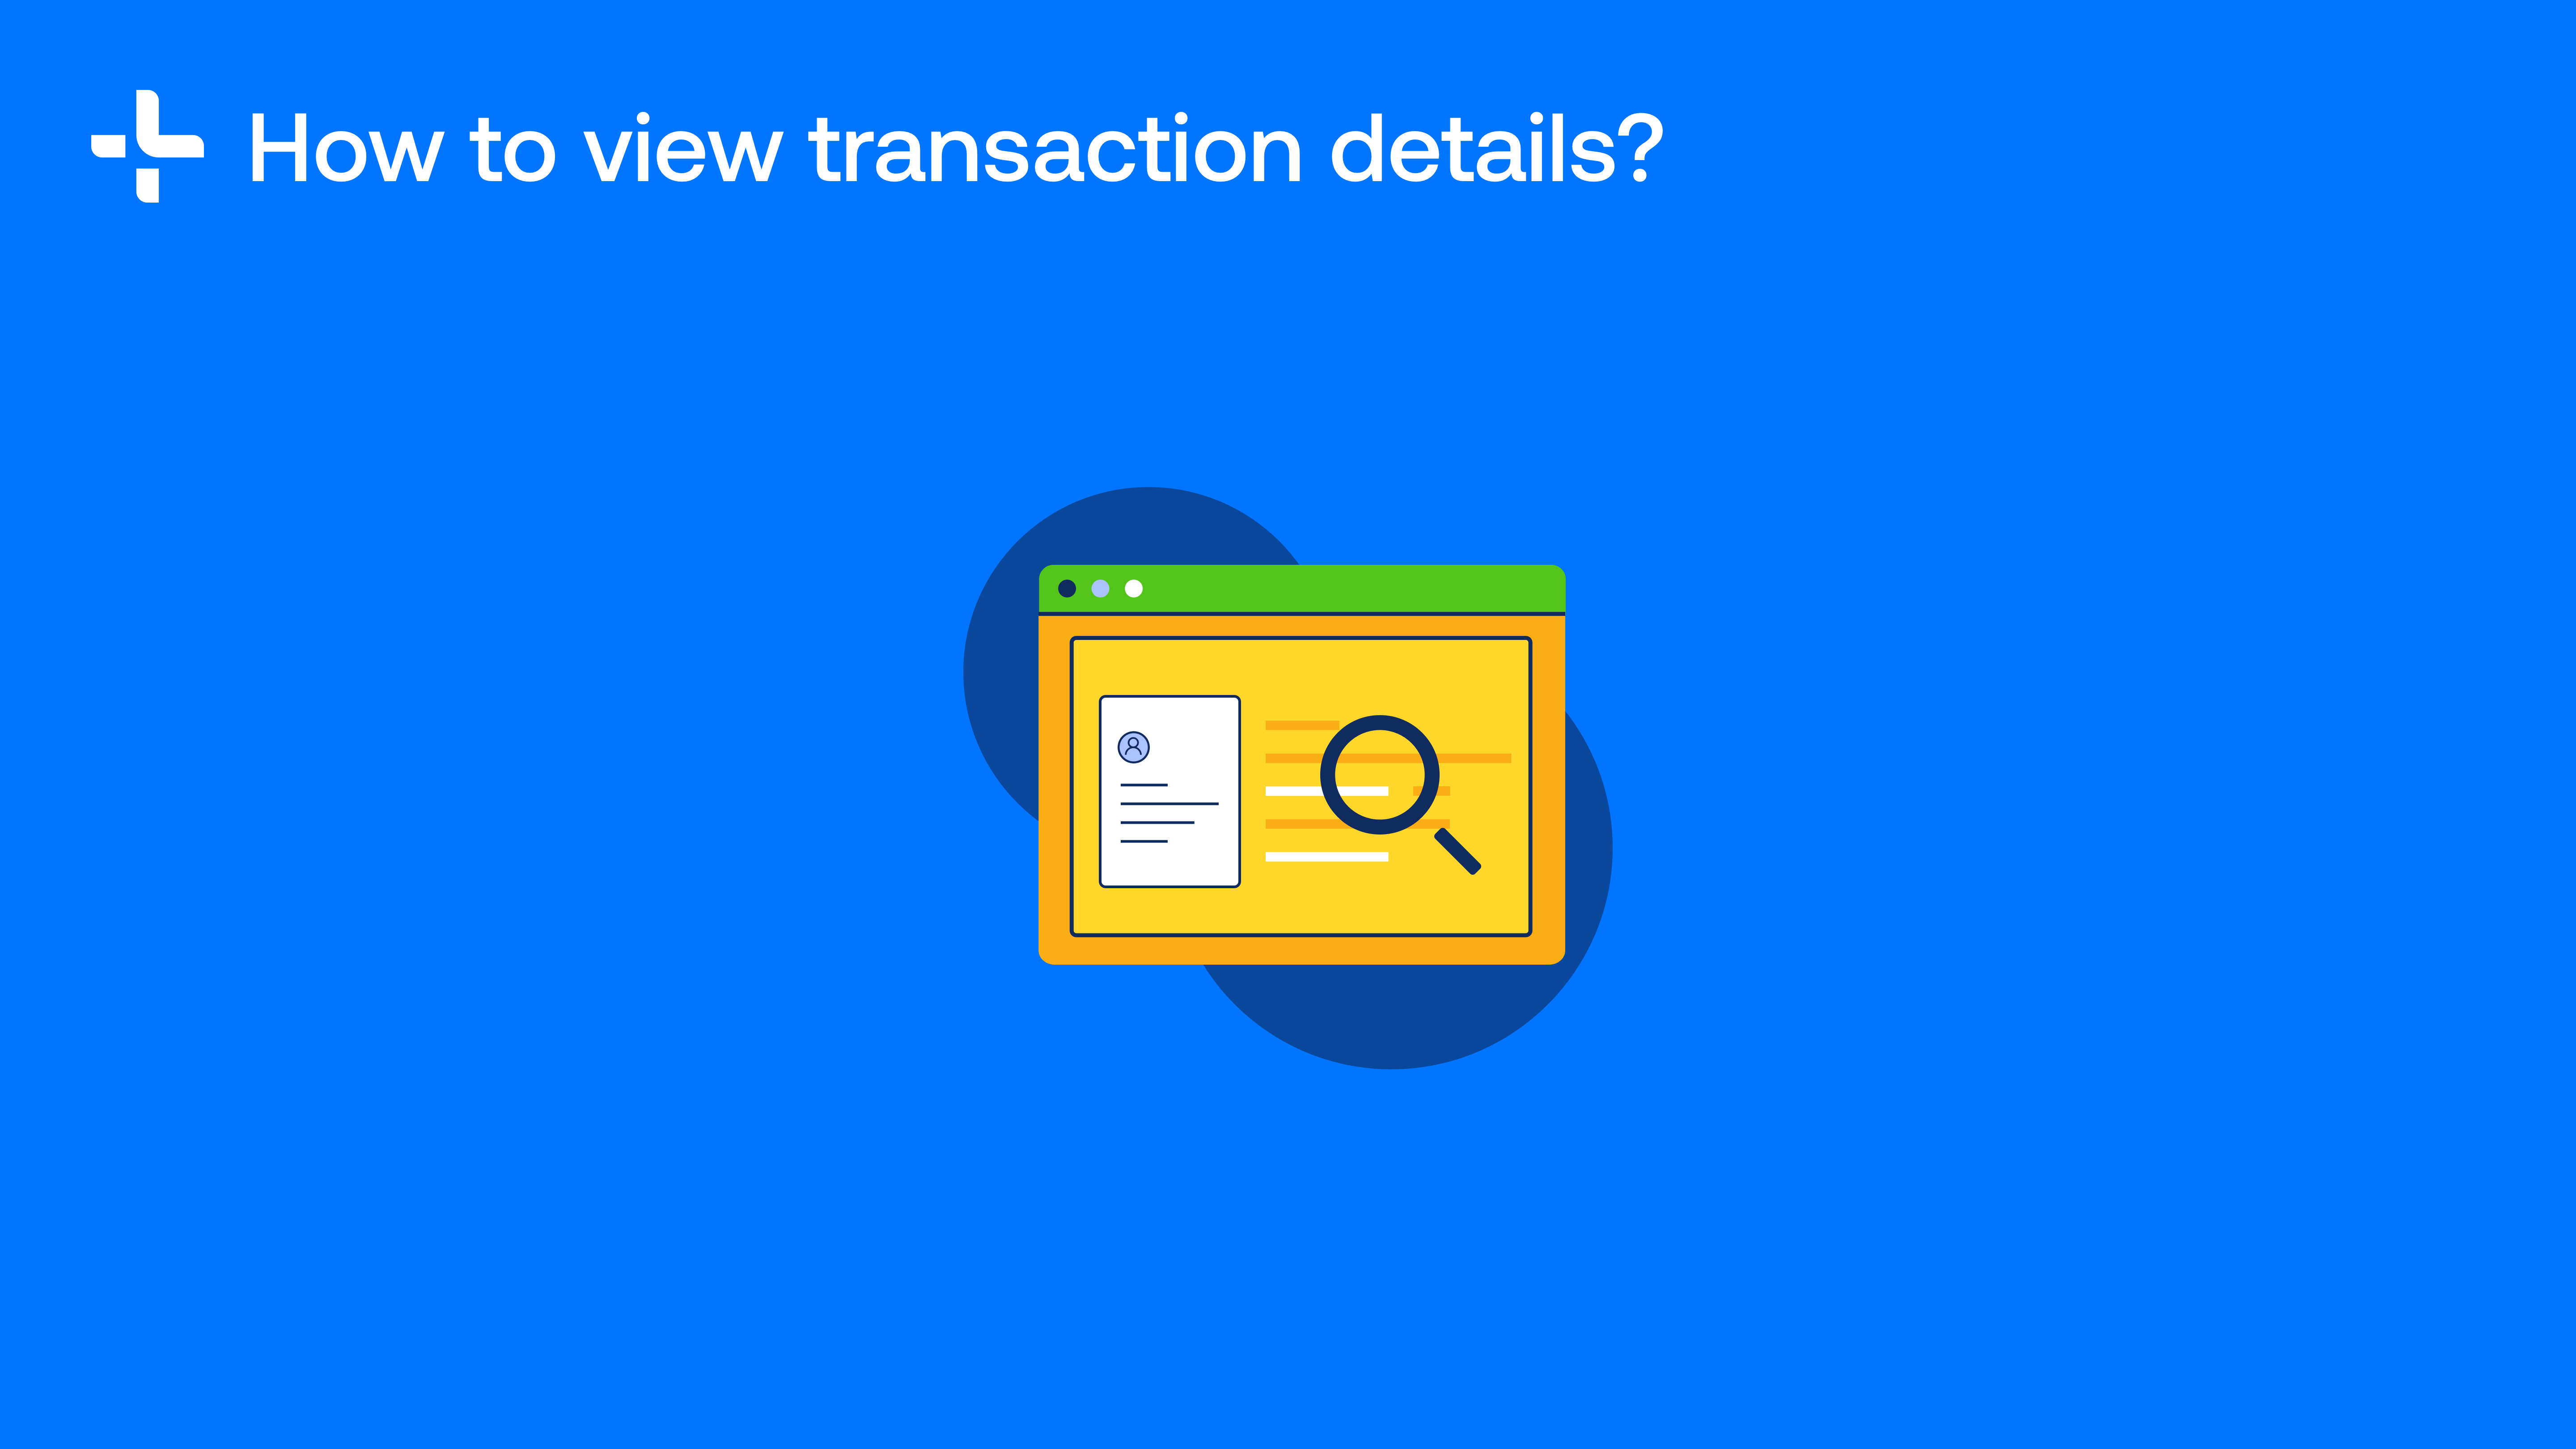 How to view transaction details